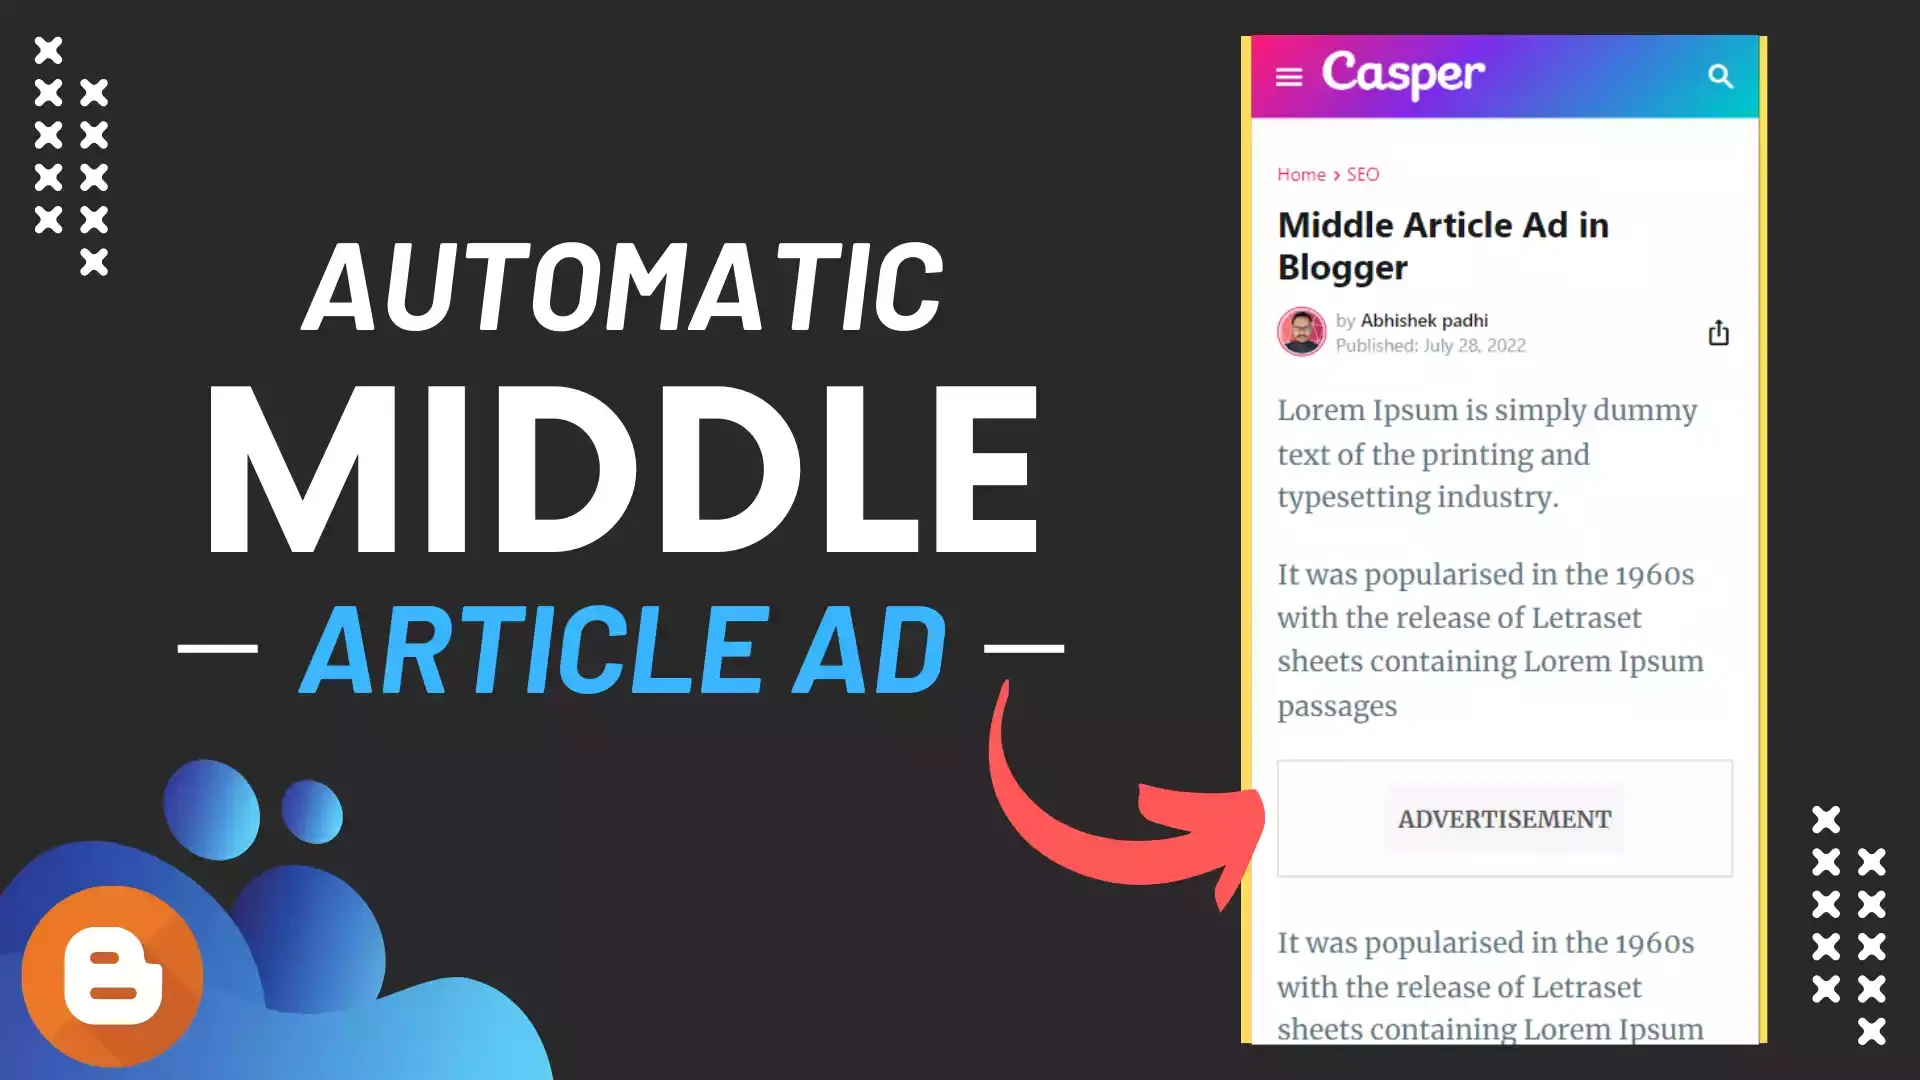 How to Add Middle Article Ads in Blogger (Google Adsense)